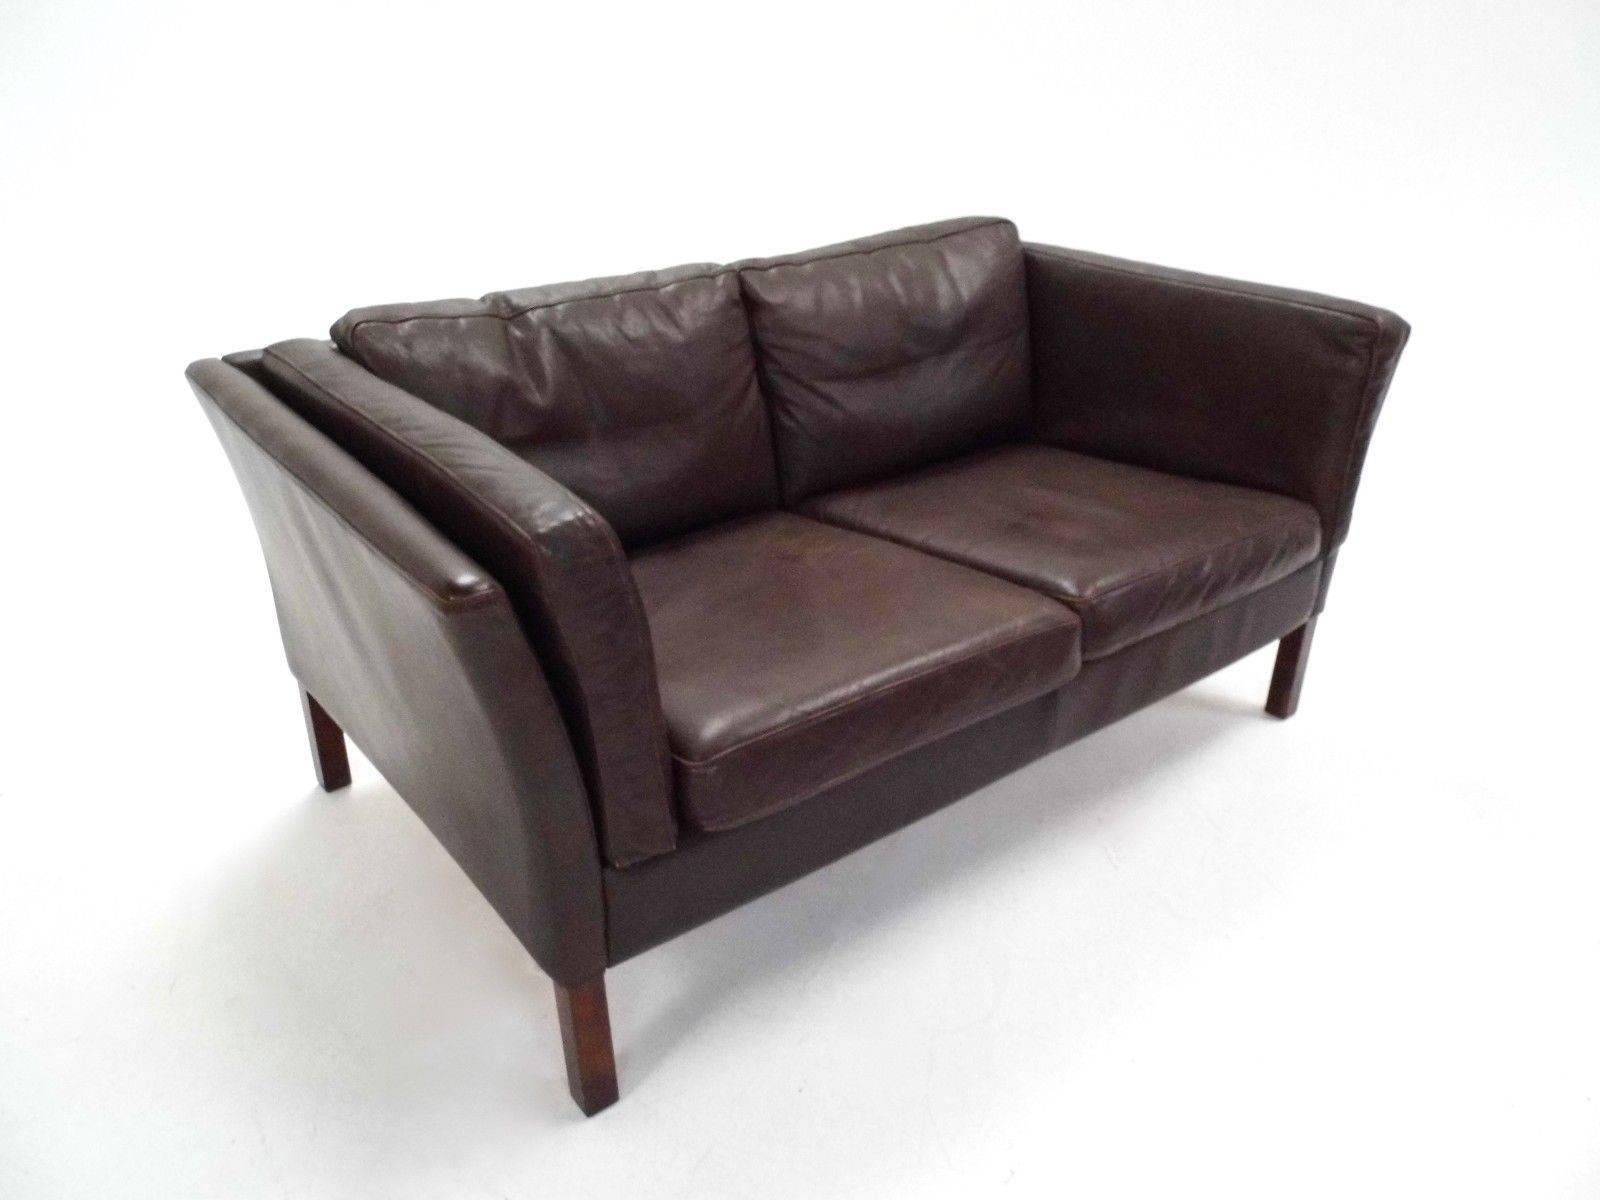 A beautiful Danish brown leather two-seat sofa, this would make a stylish addition to any living or work area. The sofa has wide cushions and sculptured padded armrests for enhanced comfort. A striking piece of classic Scandinavian furniture.

The